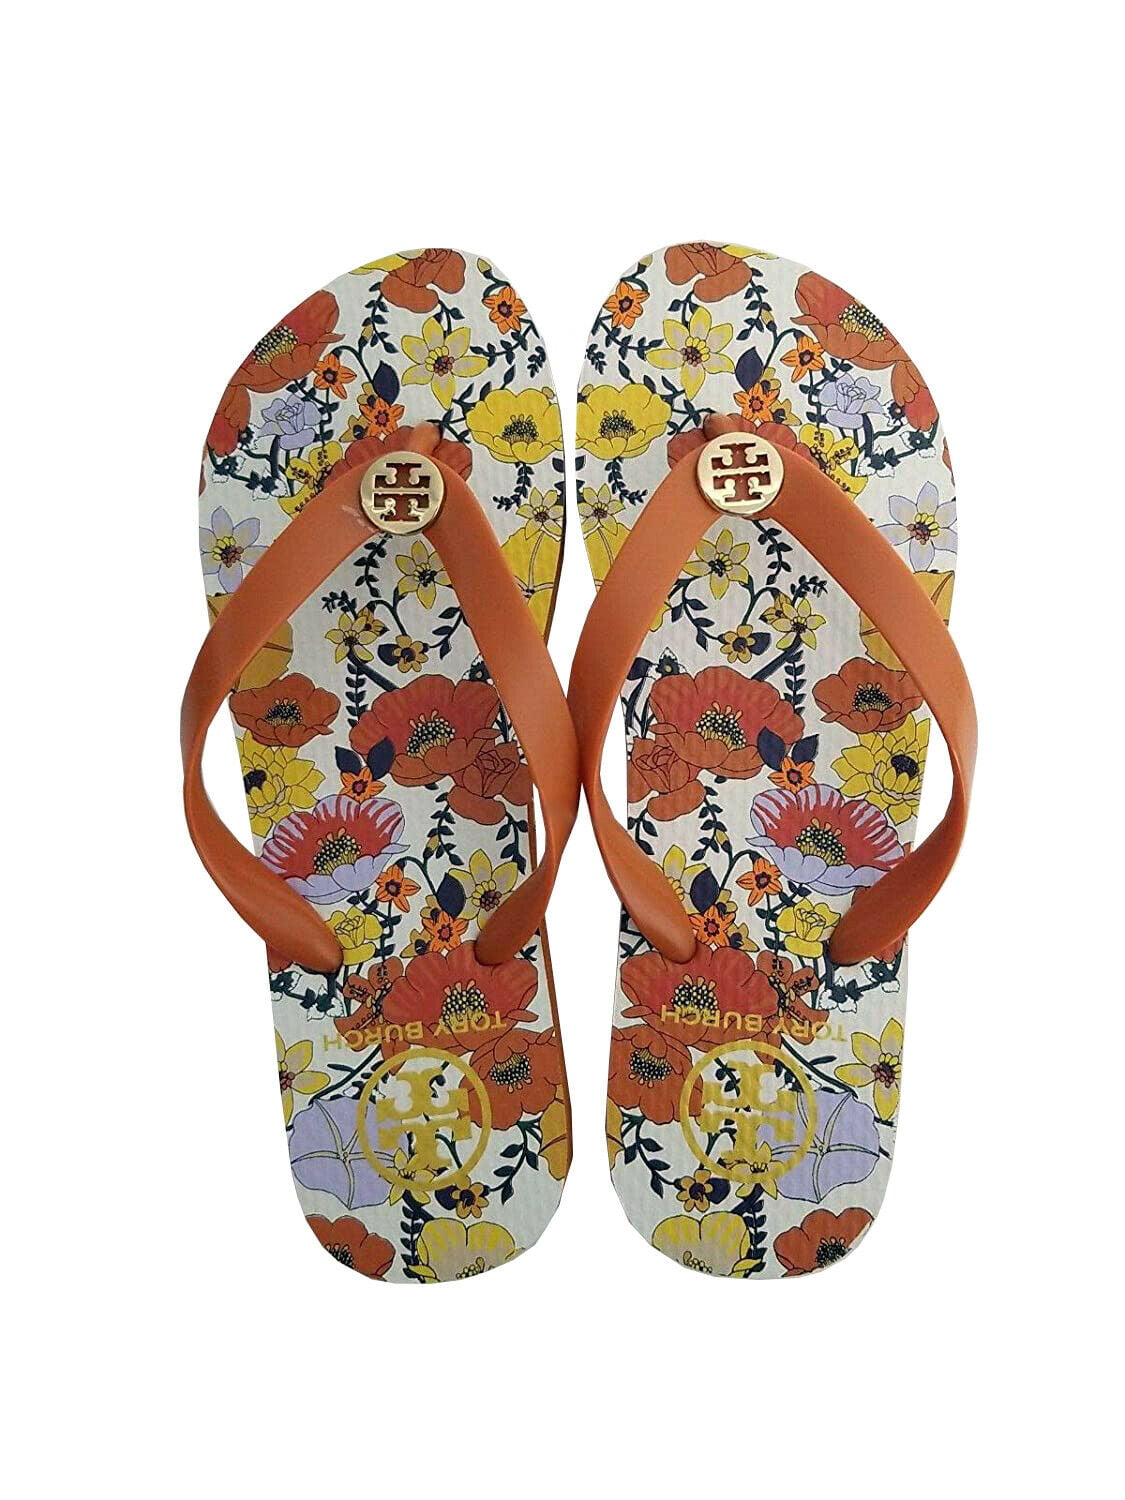 New Tory Burch Women's Flip Flops in Canyon Orange - Blossom Ditsy, Size 7,  8663-7 